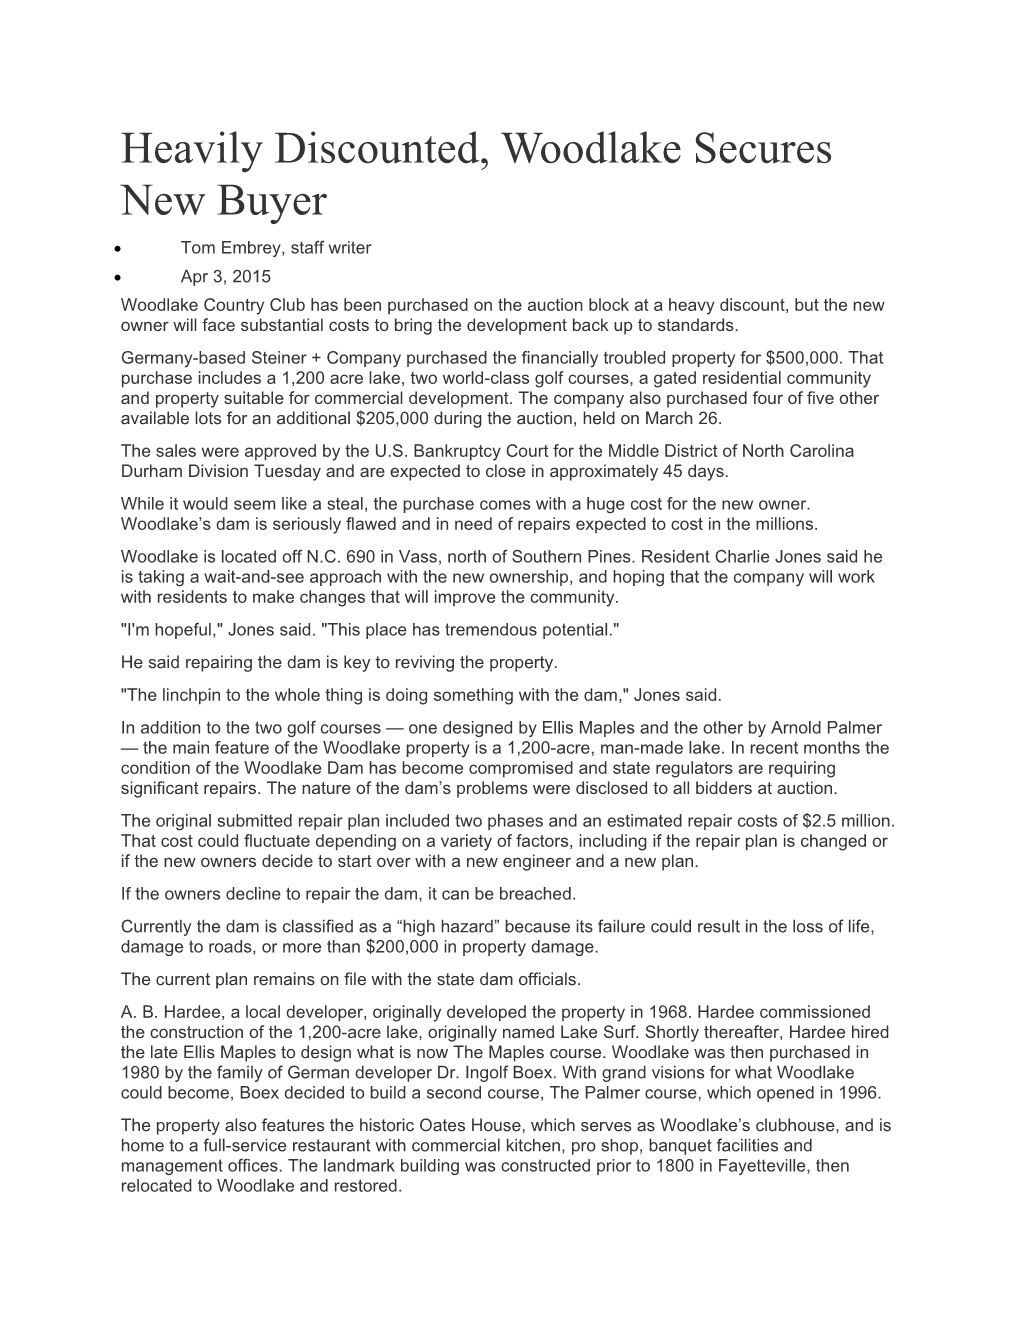 Heavily Discounted, Woodlake Secures New Buyer